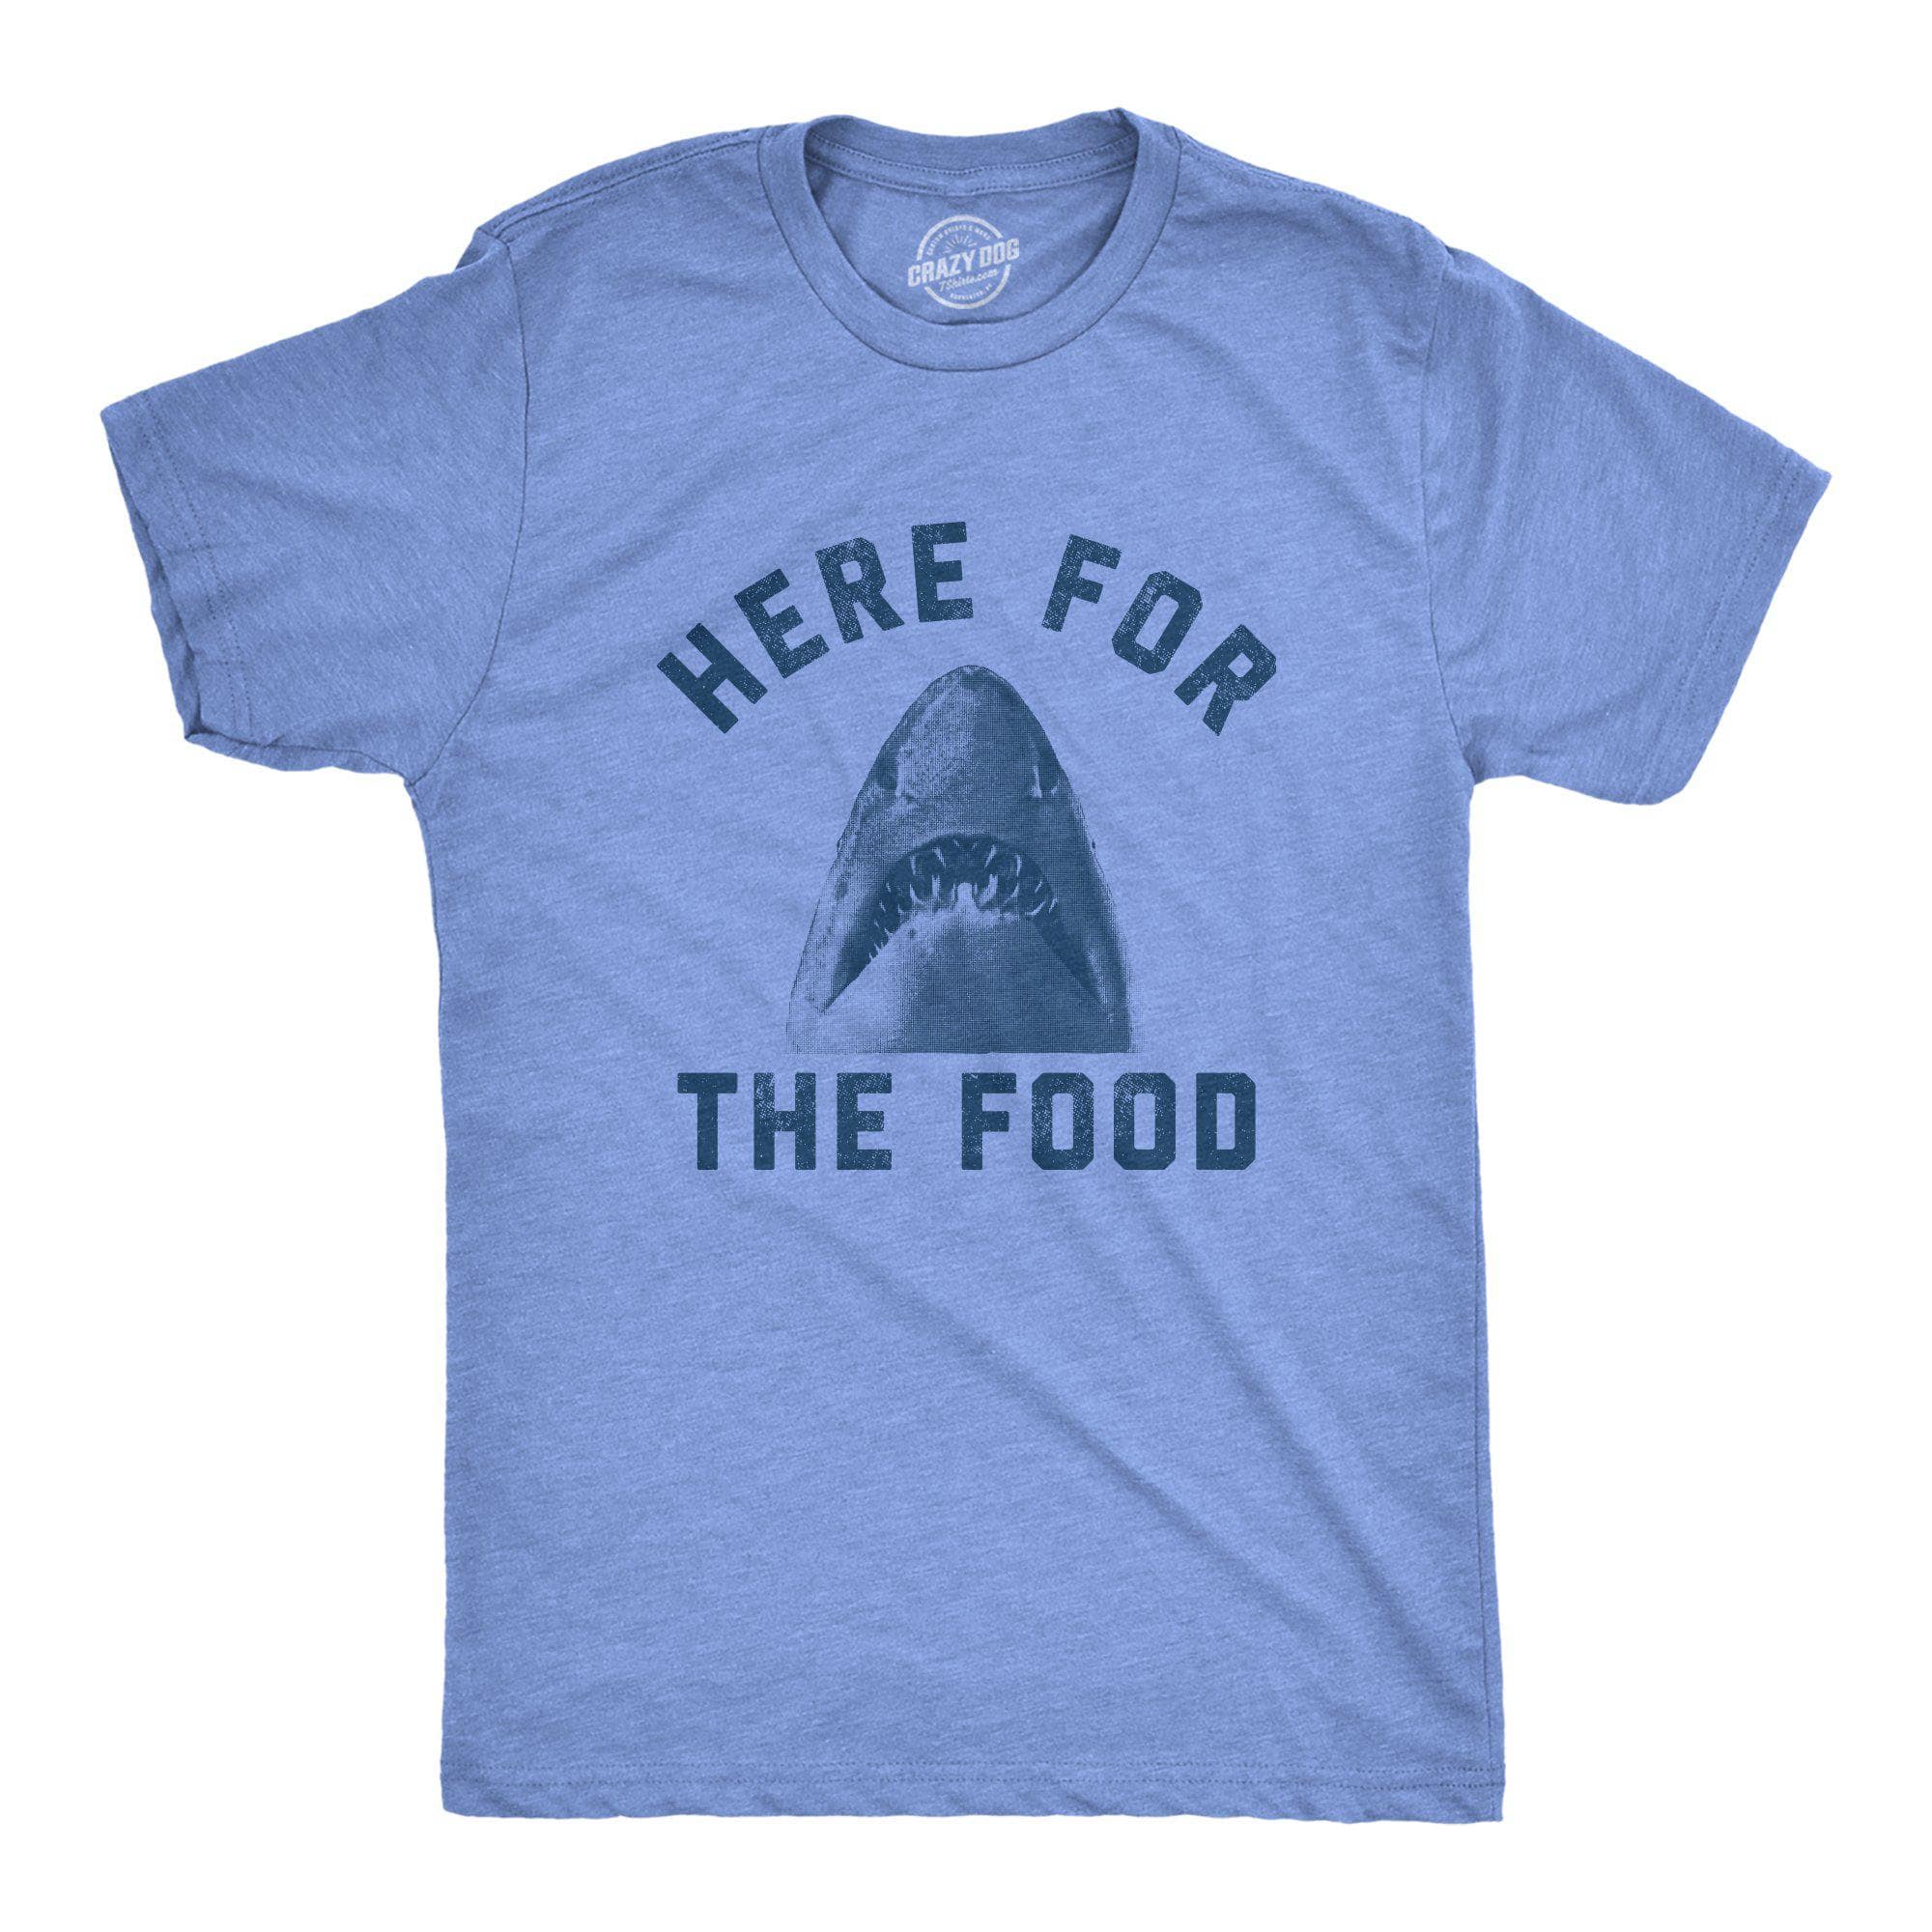 Here For The Food Men's Tshirt - Crazy Dog T-Shirts